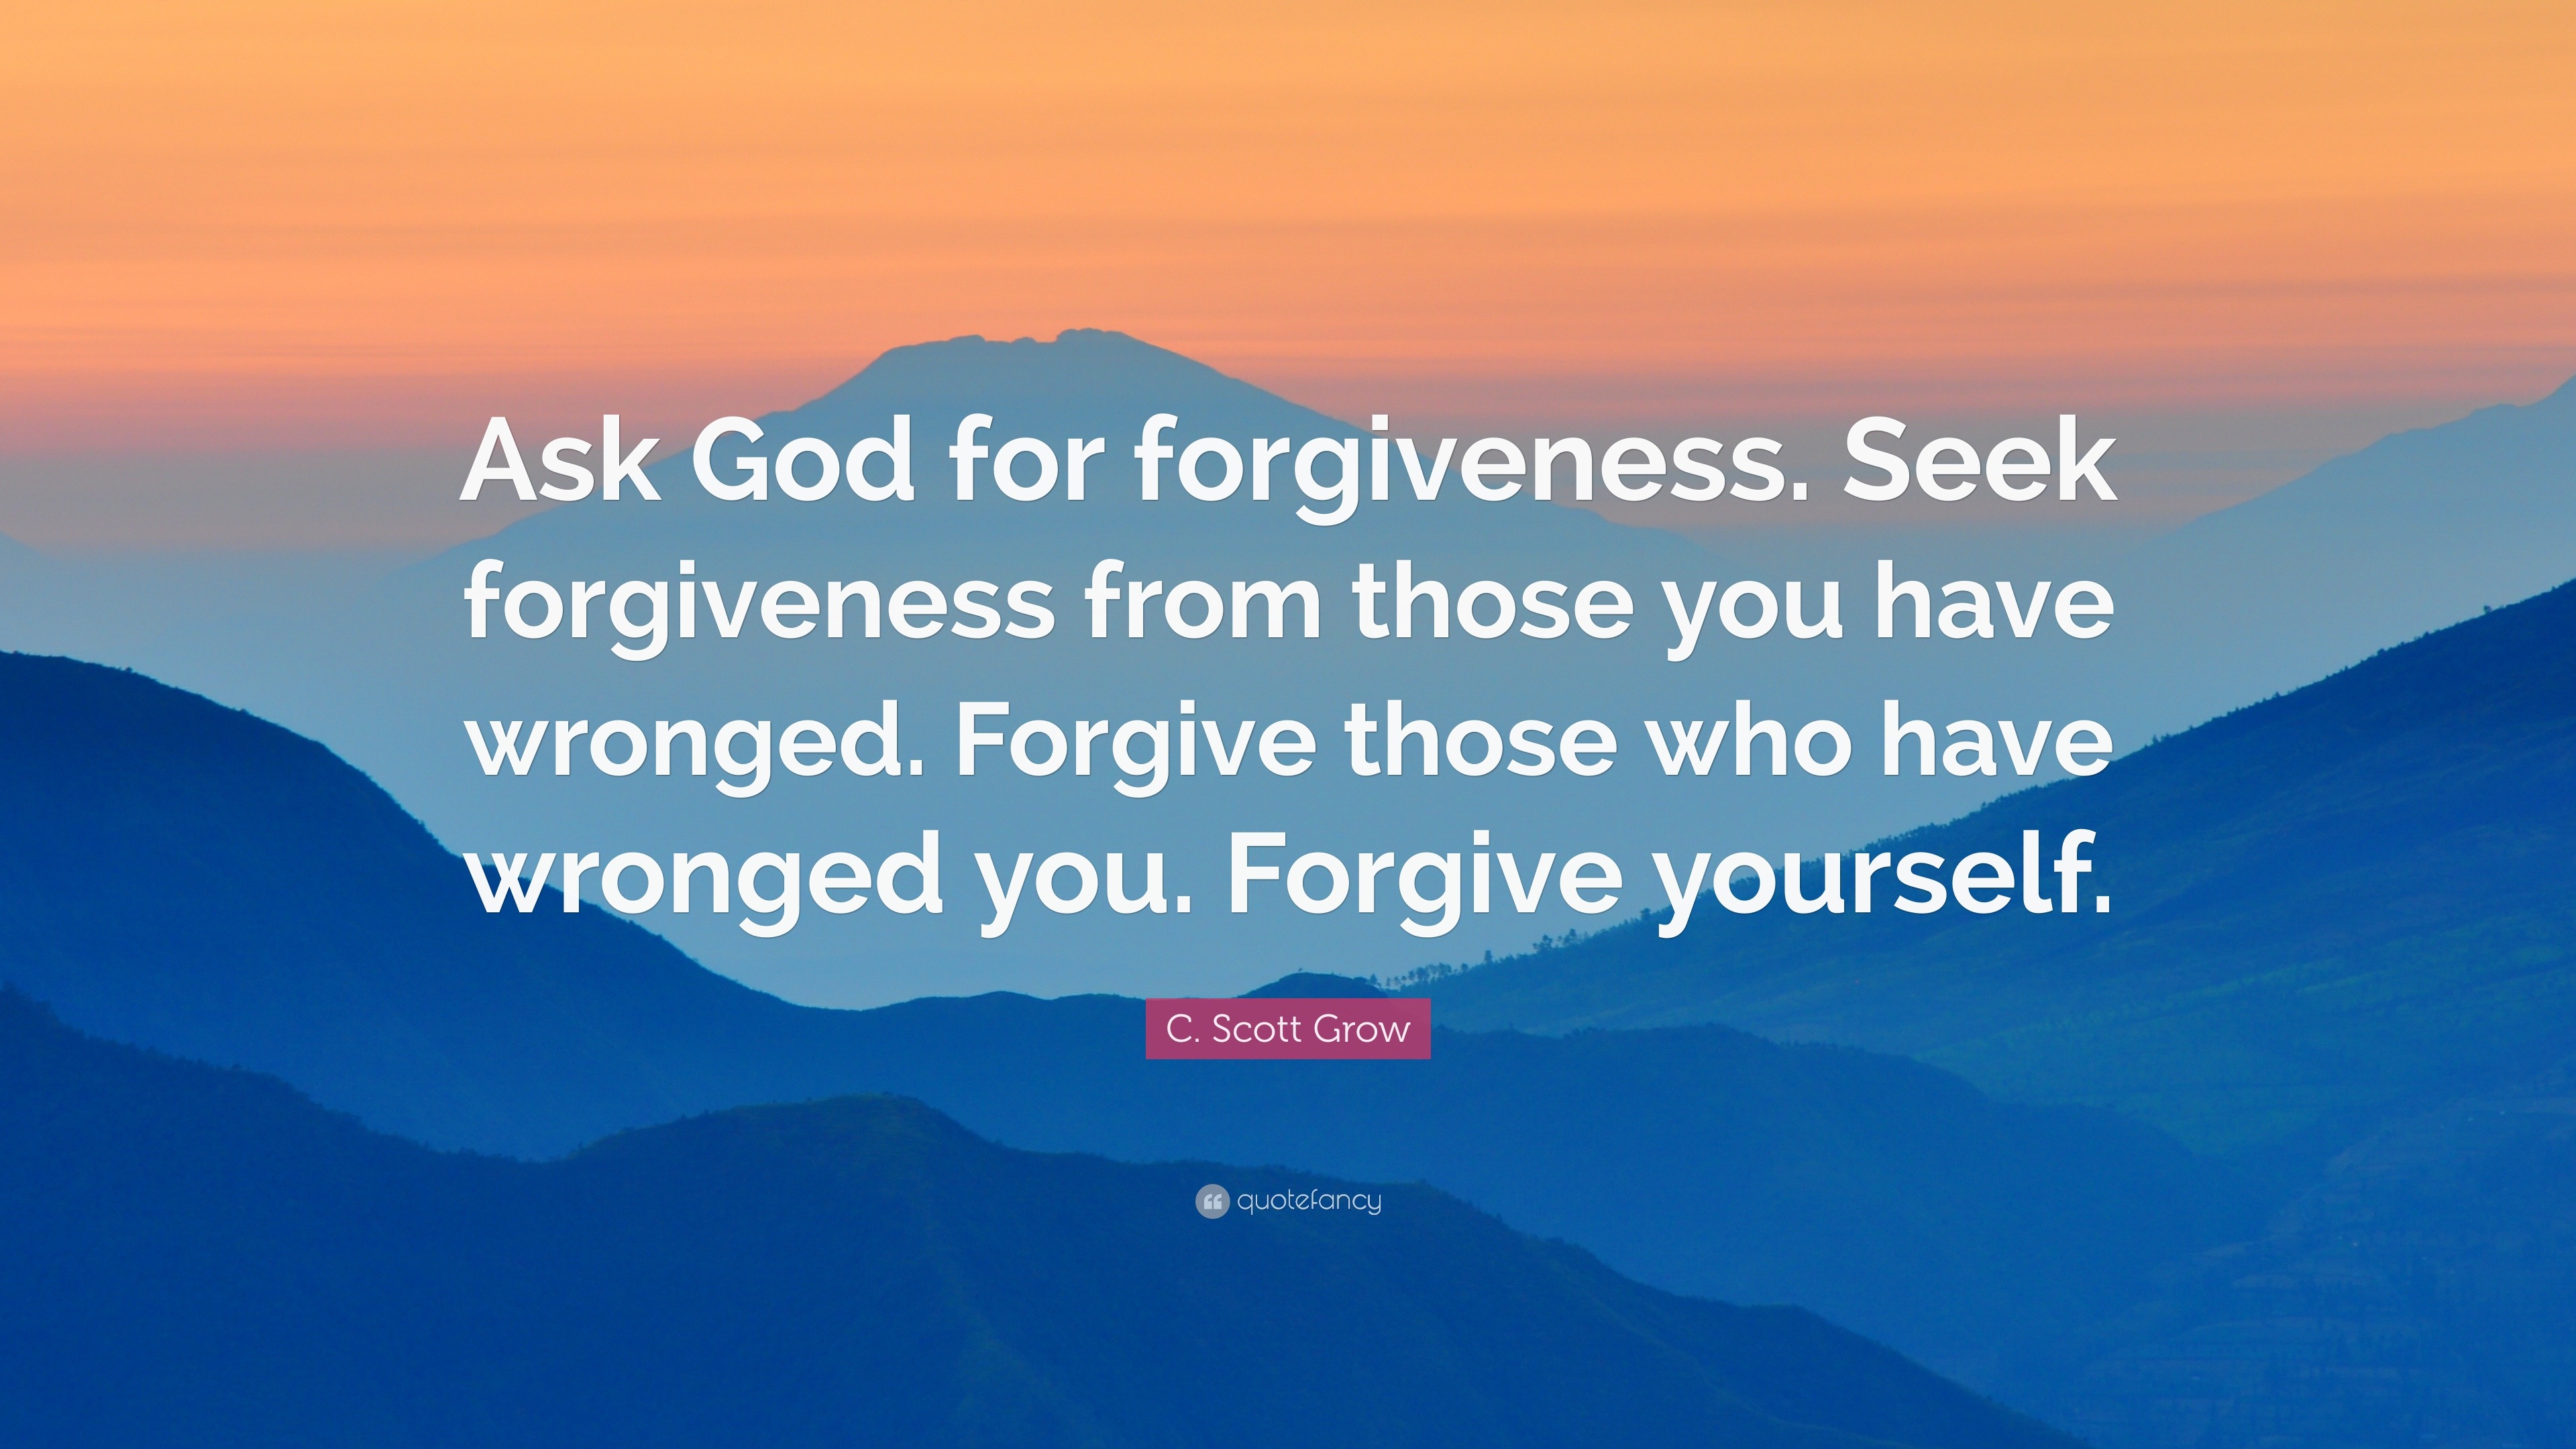 How to ask for forgiveness to god